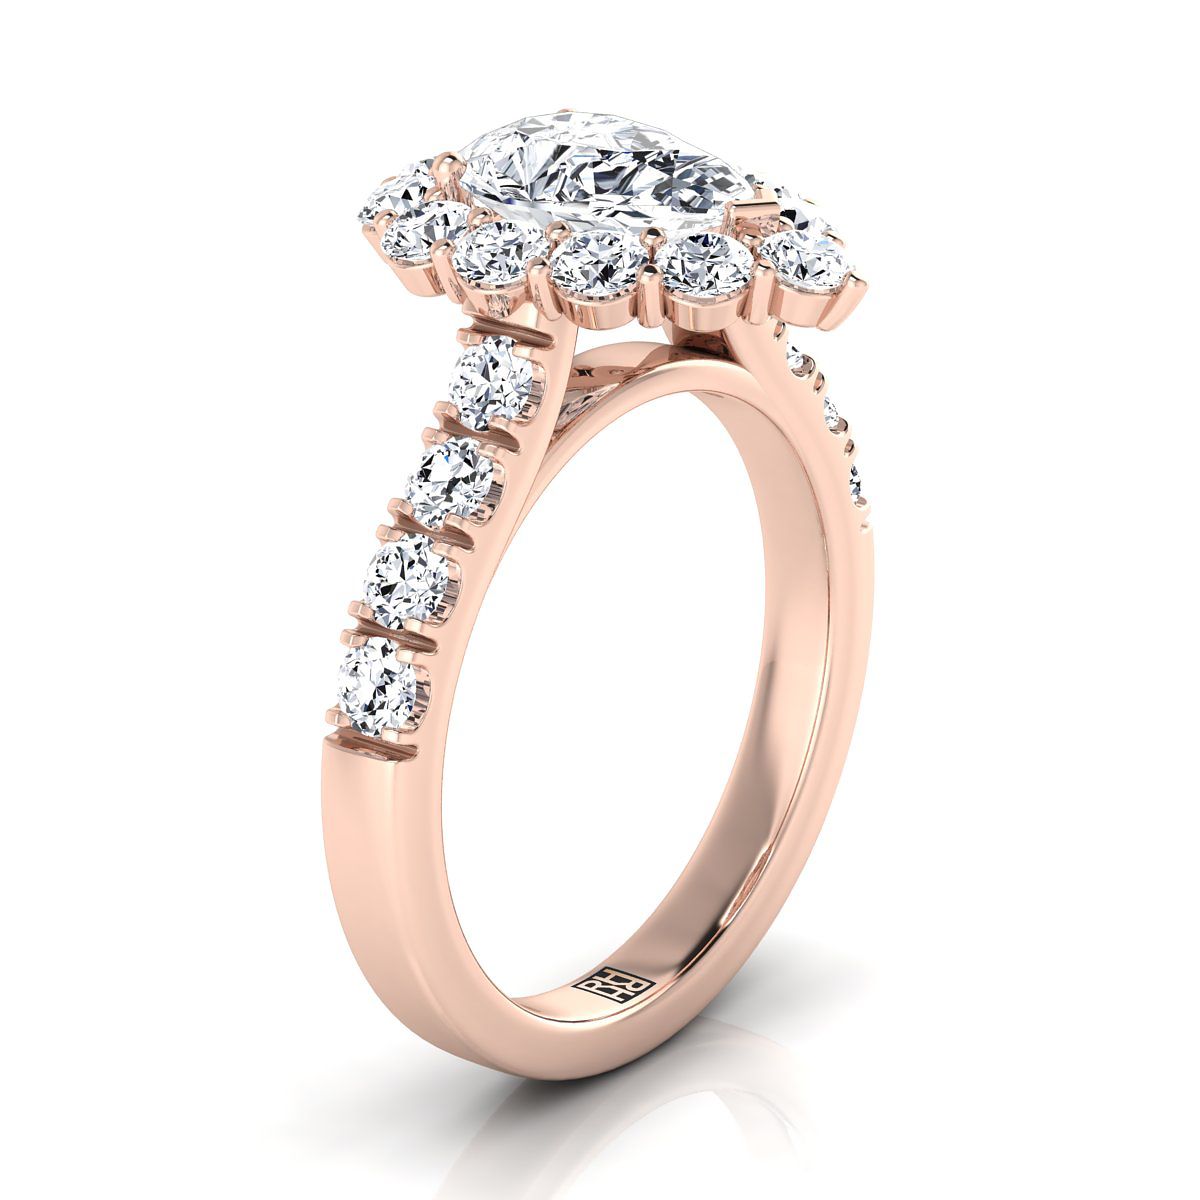 14K Rose Gold Pear Shape Center Diamond Luxe Style French Pave Halo Engagement Ring -1-1/10ctw